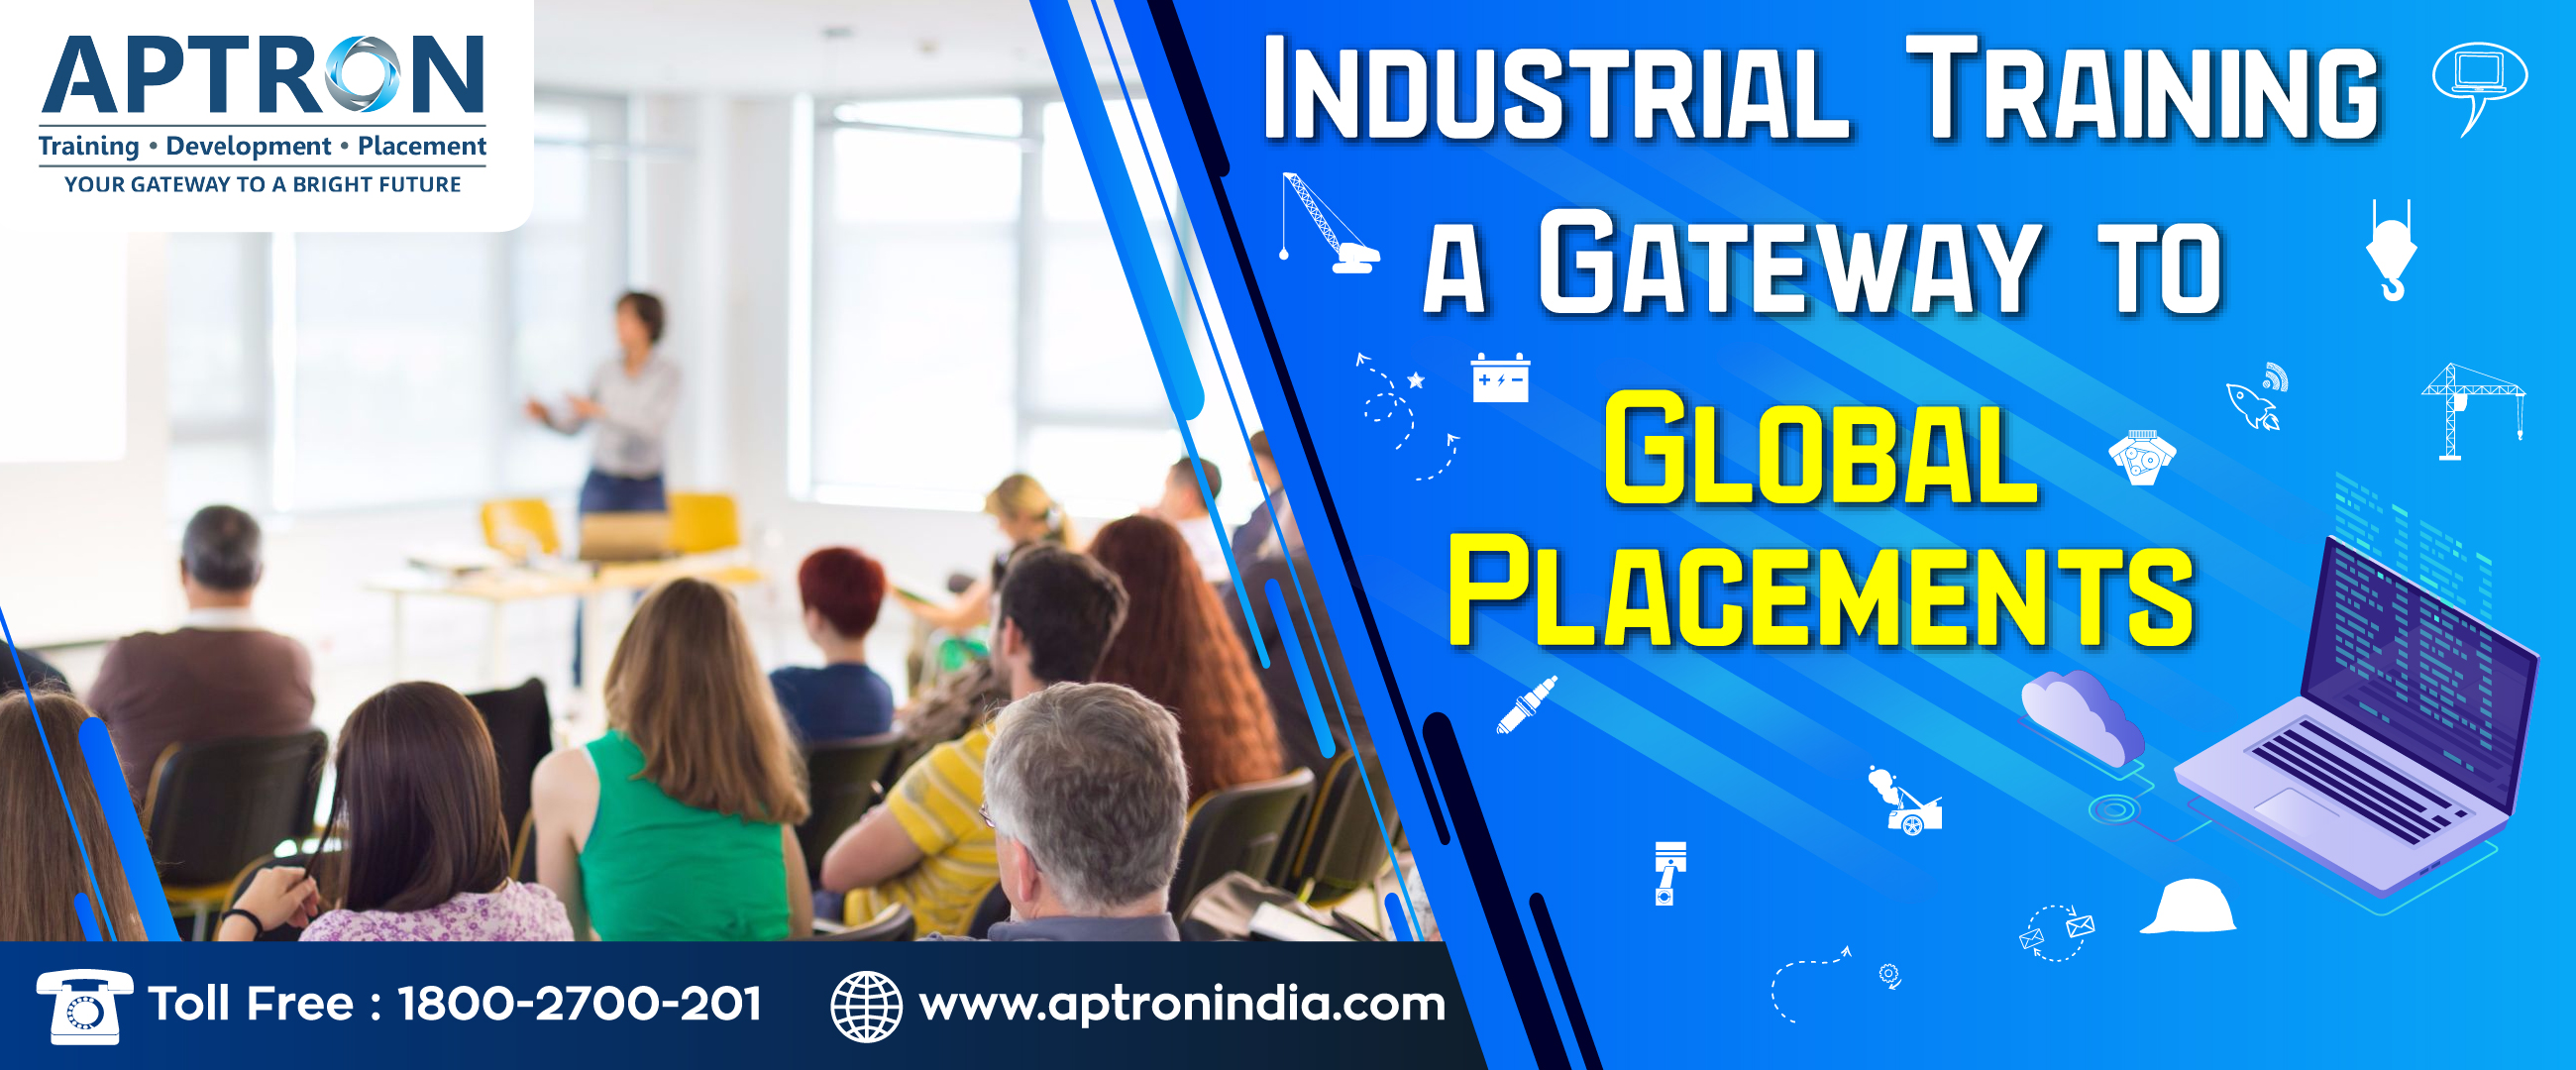 Industrial Training a Gateway to Global Placements